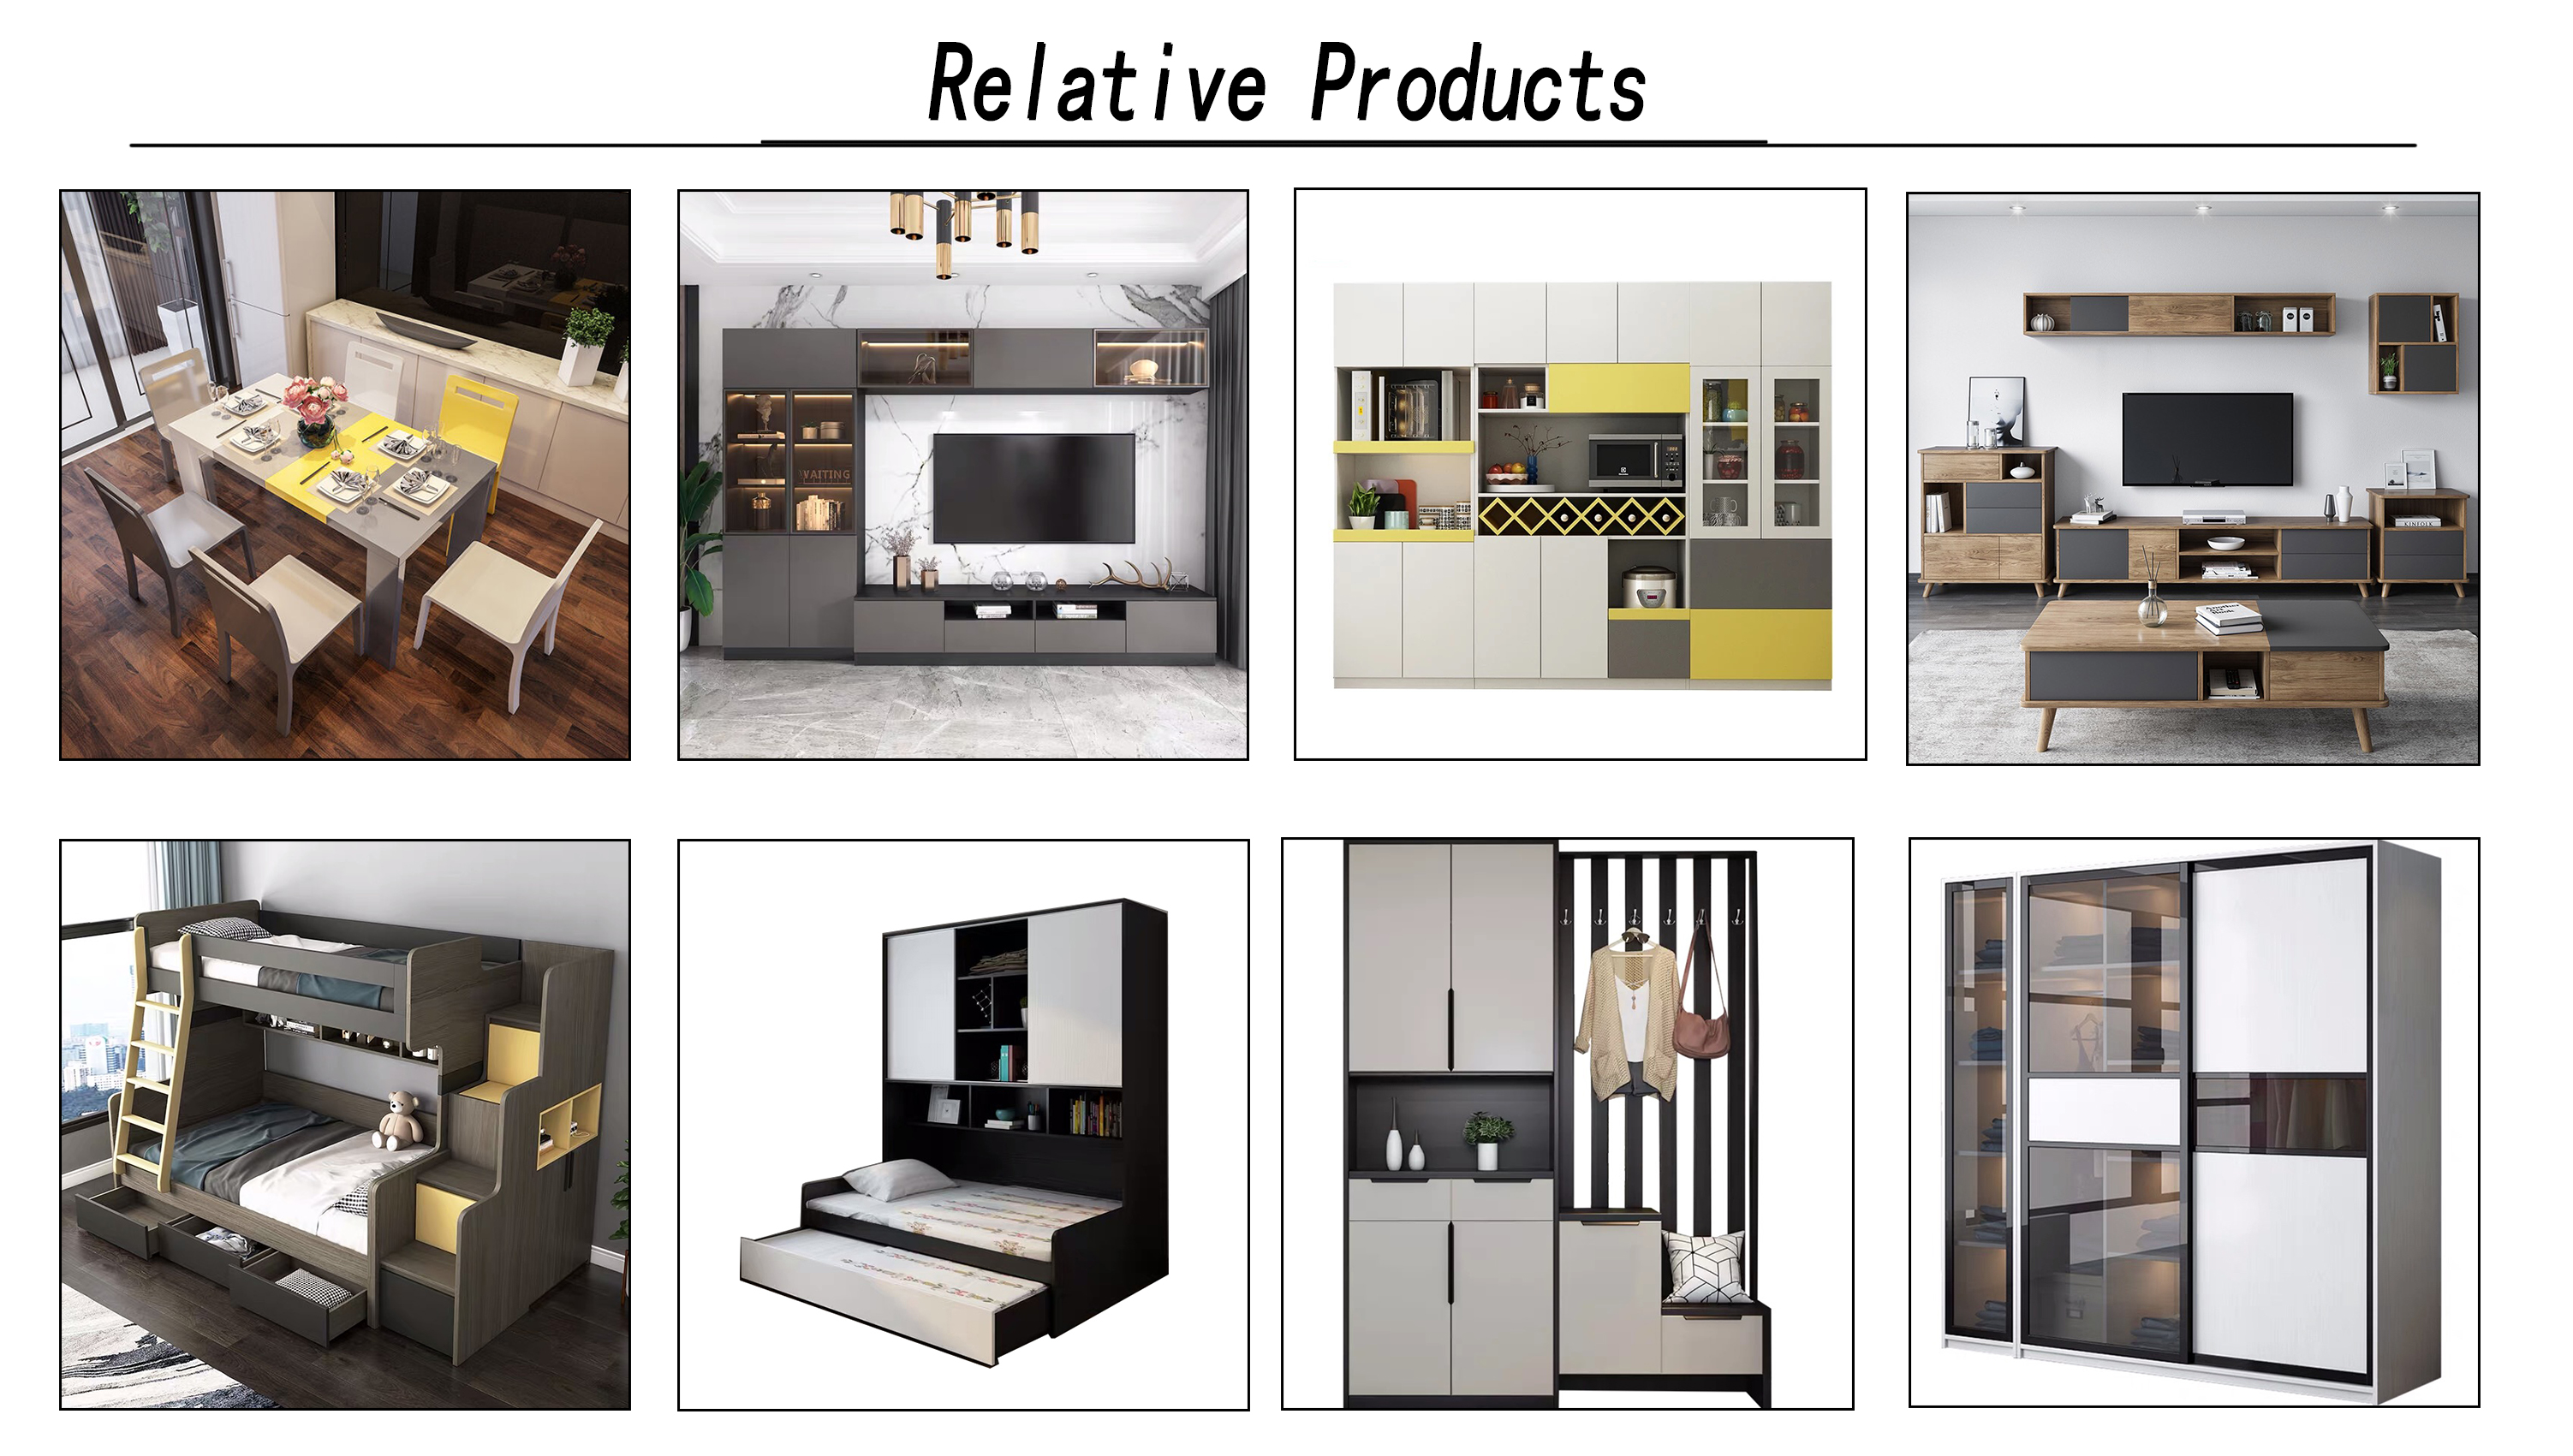 Relative Products(2)